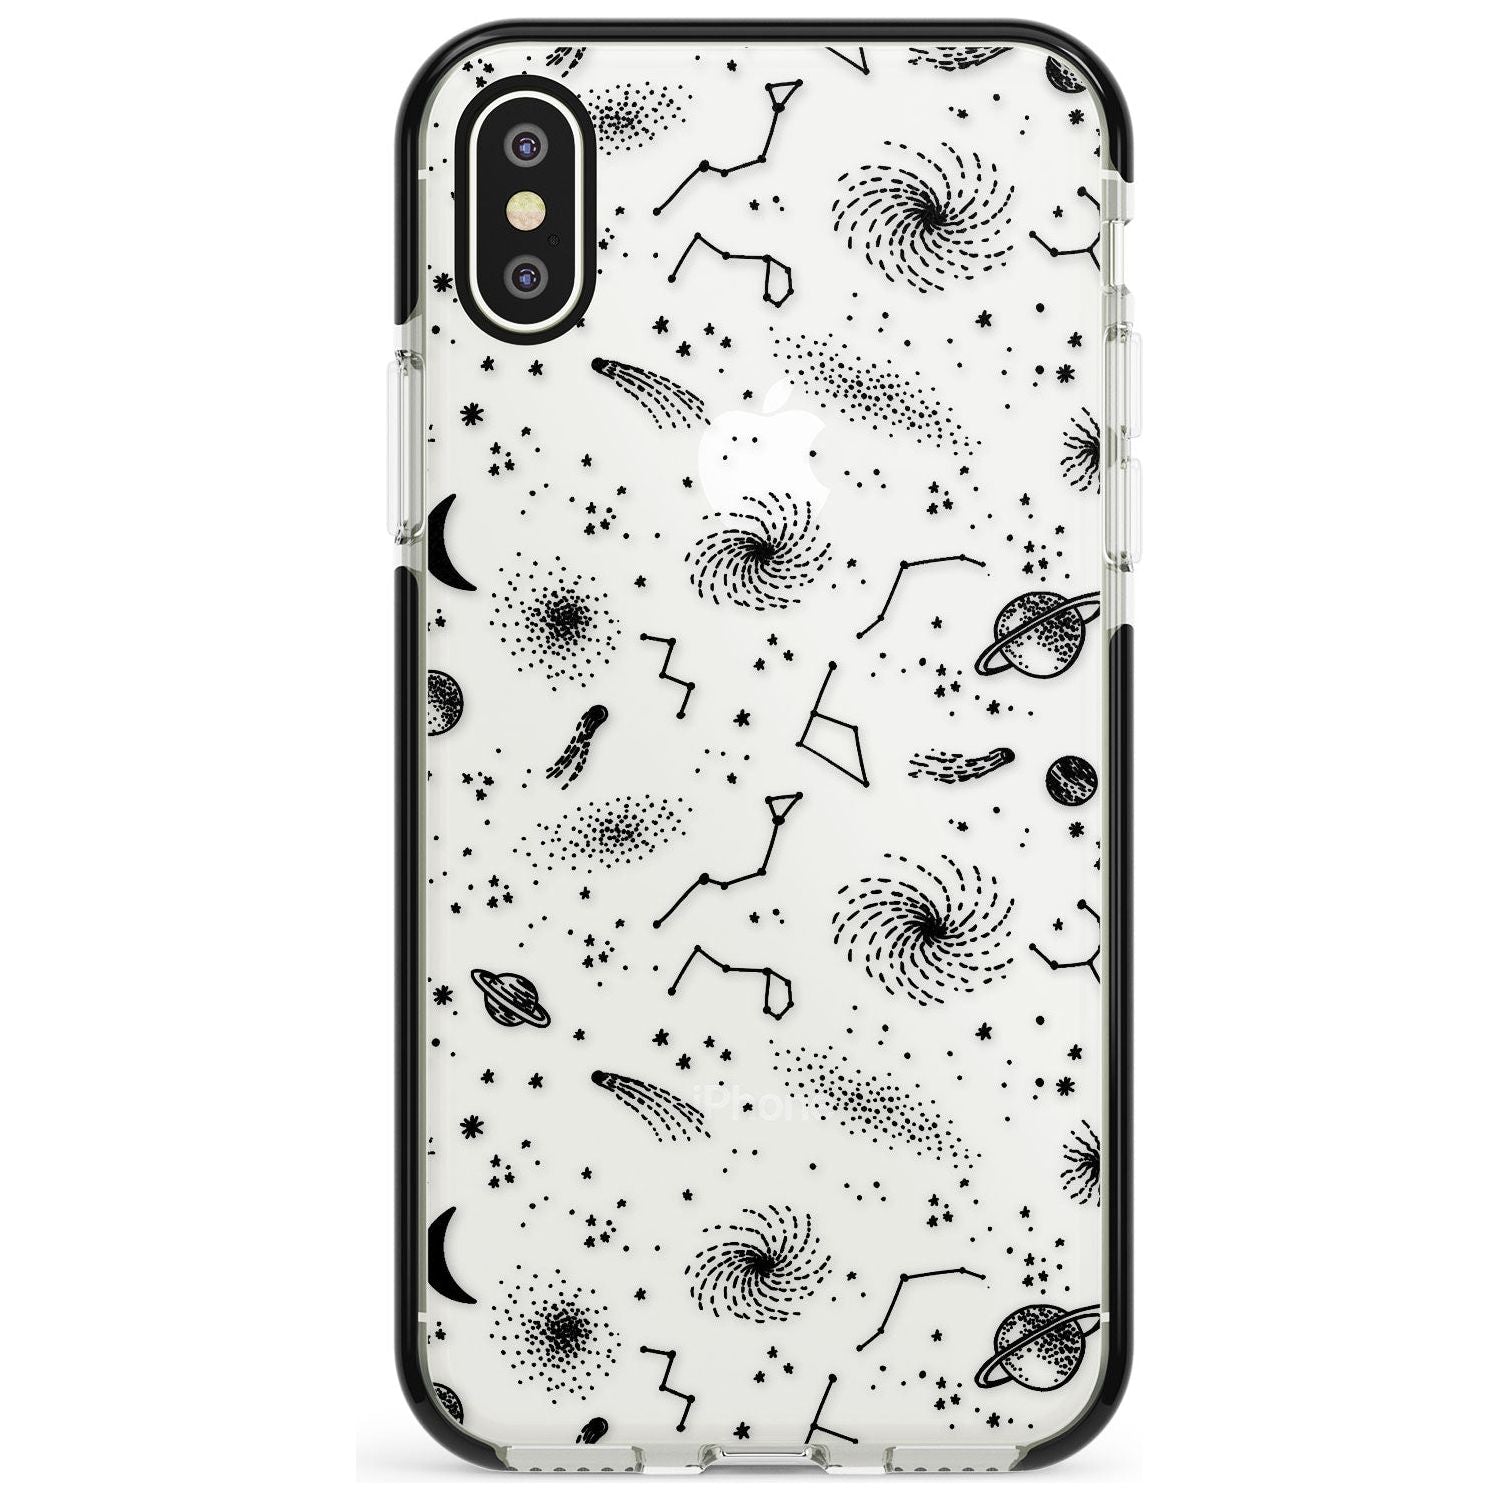 Mixed Galaxy Pattern Black Impact Phone Case for iPhone X XS Max XR